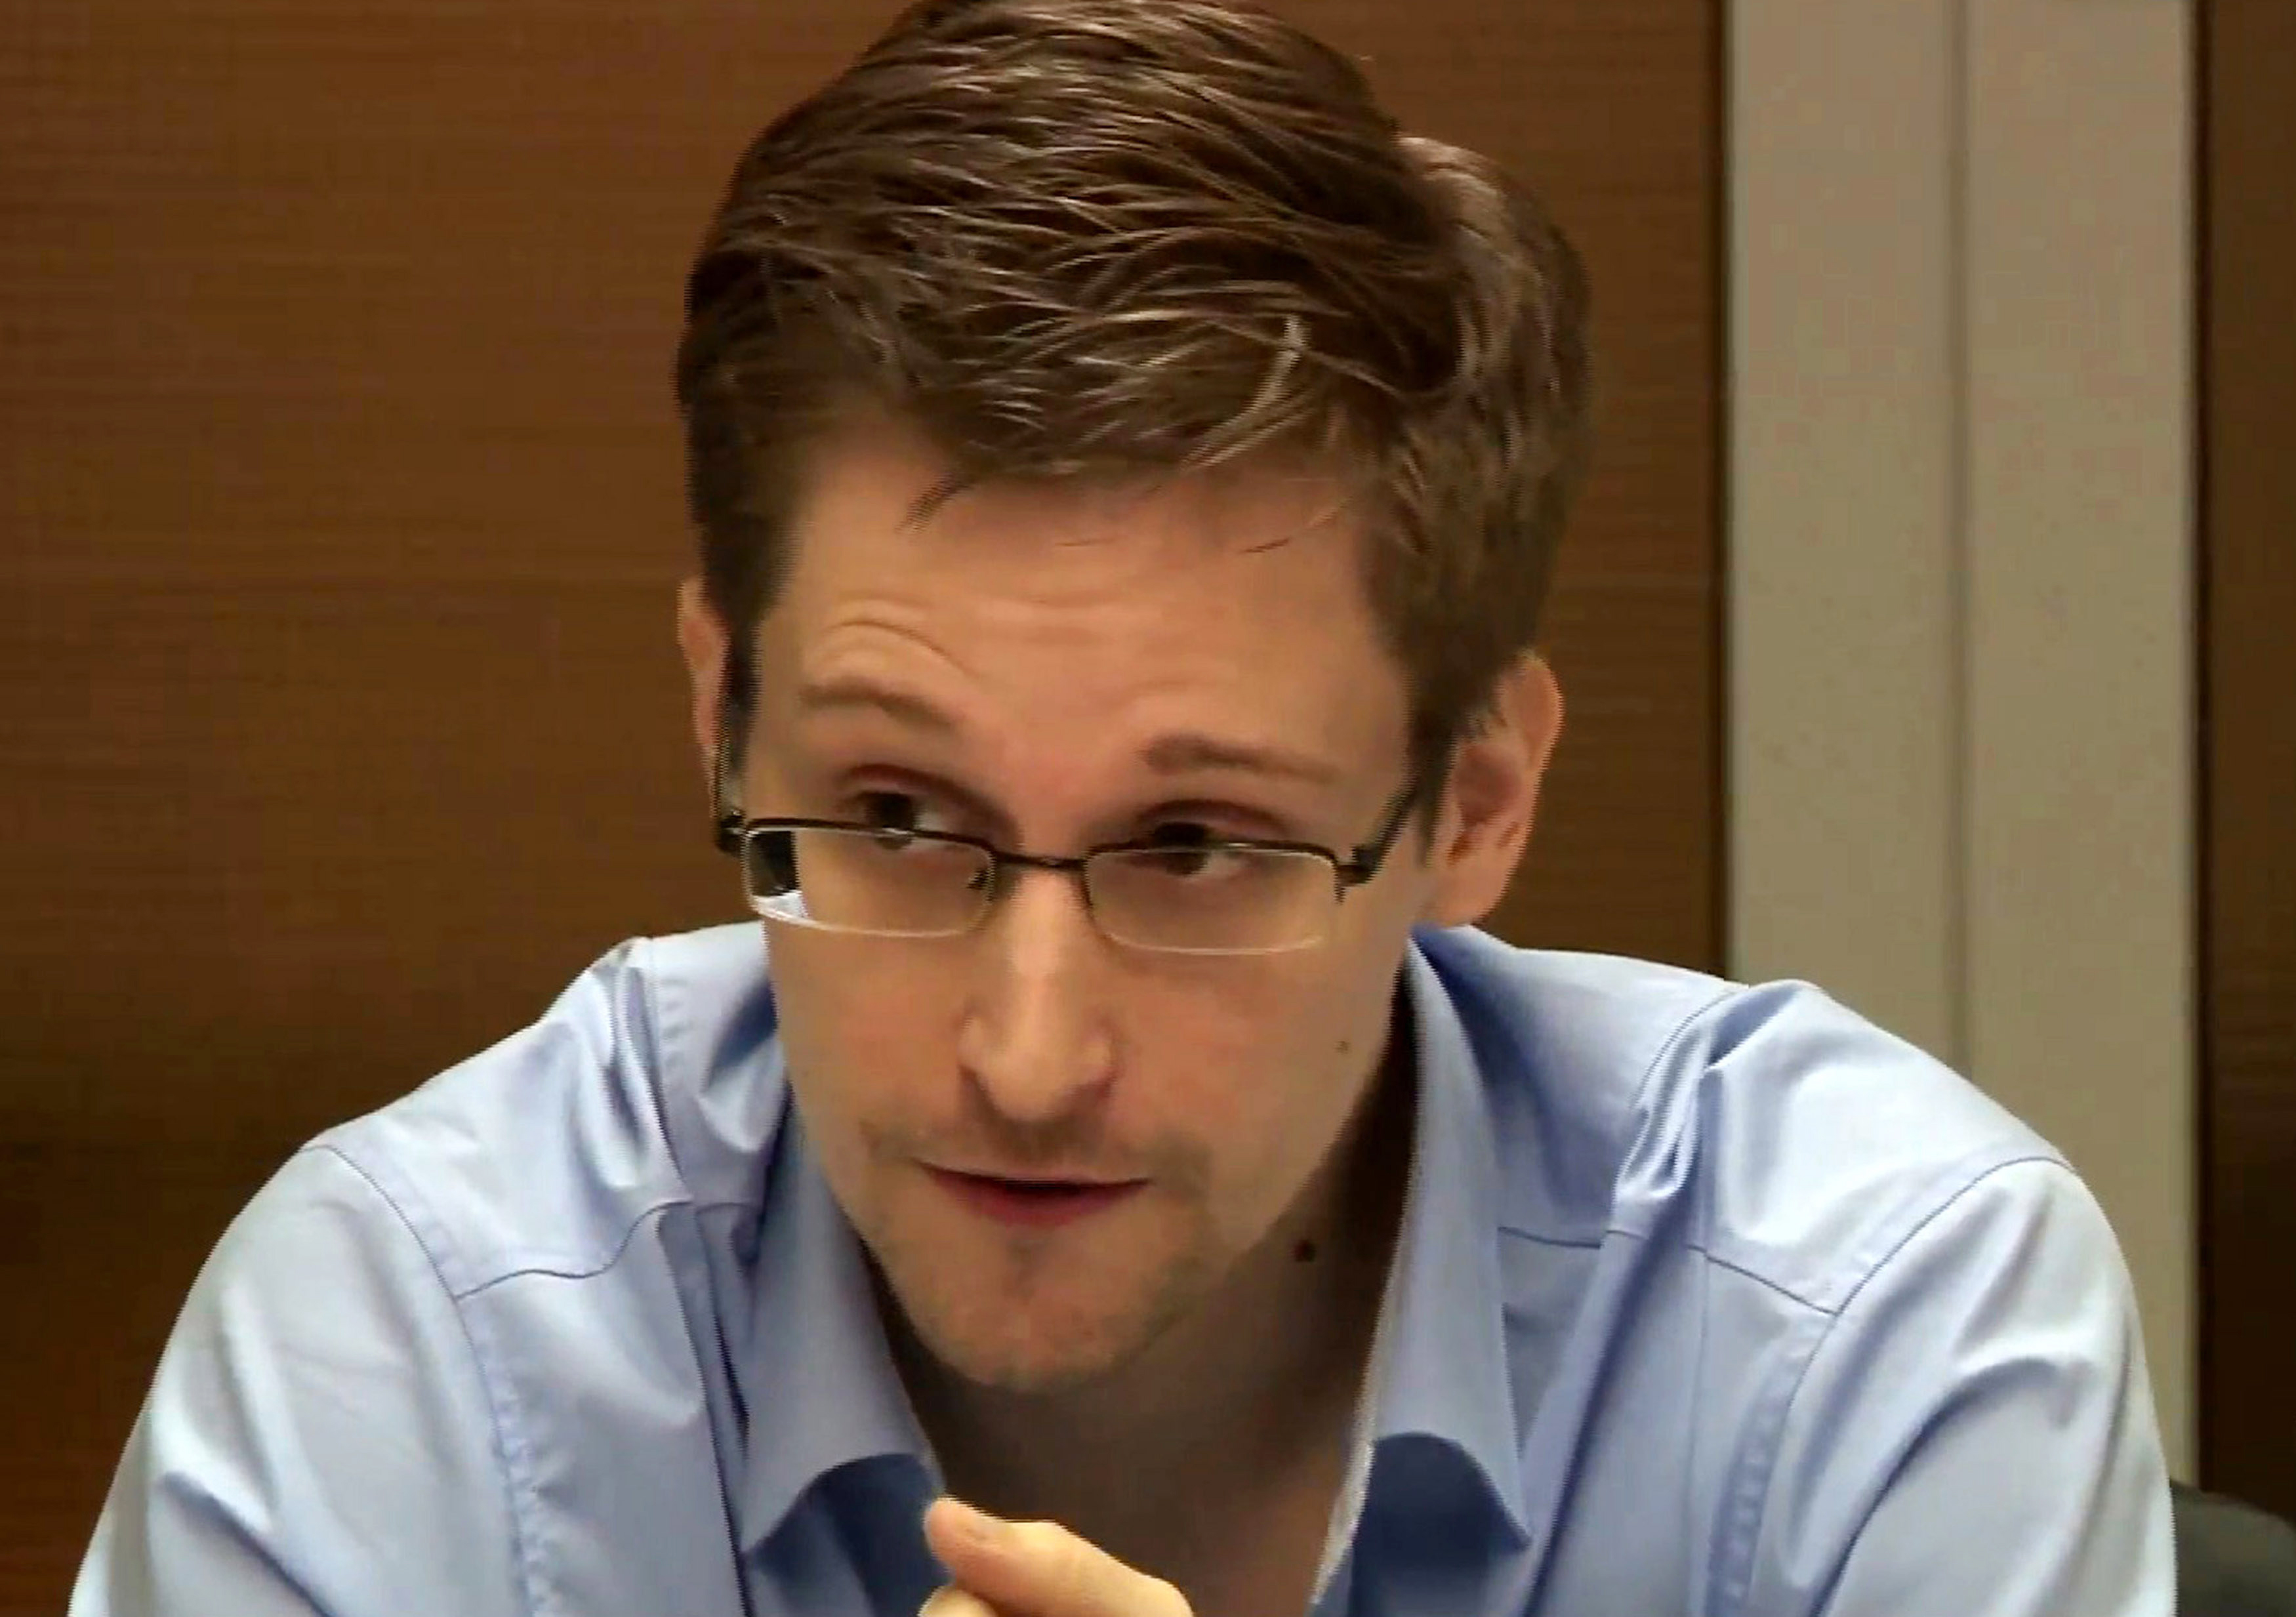 Edward Snowden in Moscow in 2013. (Sunshinepress/Getty Images)